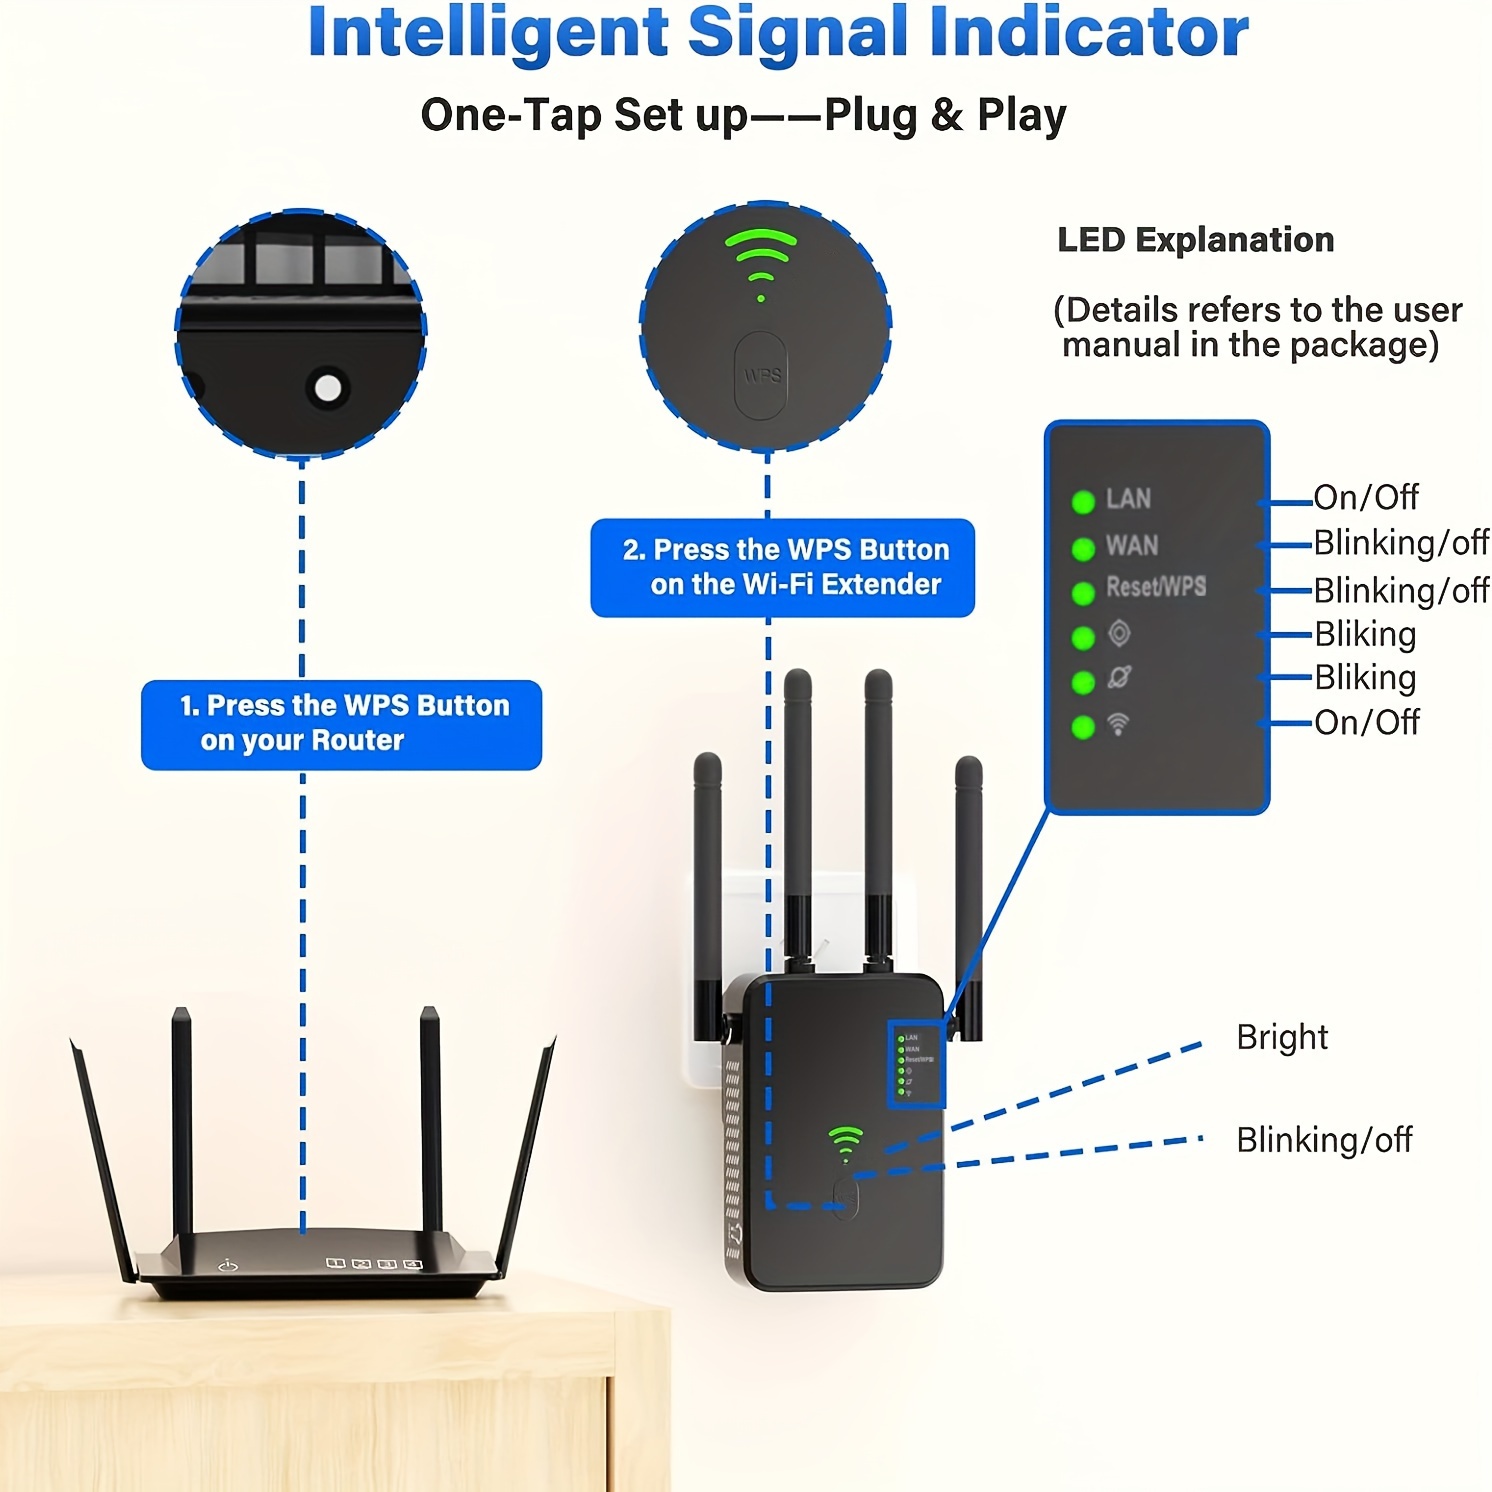 WiFi Range Extender 1200Mbps Signal Booster Repeater, 2.4G & 5GHz Dual Band  Wireless Amplifier with Intelligent Signal Indicator, One Button Setup with  Ethernet Port 